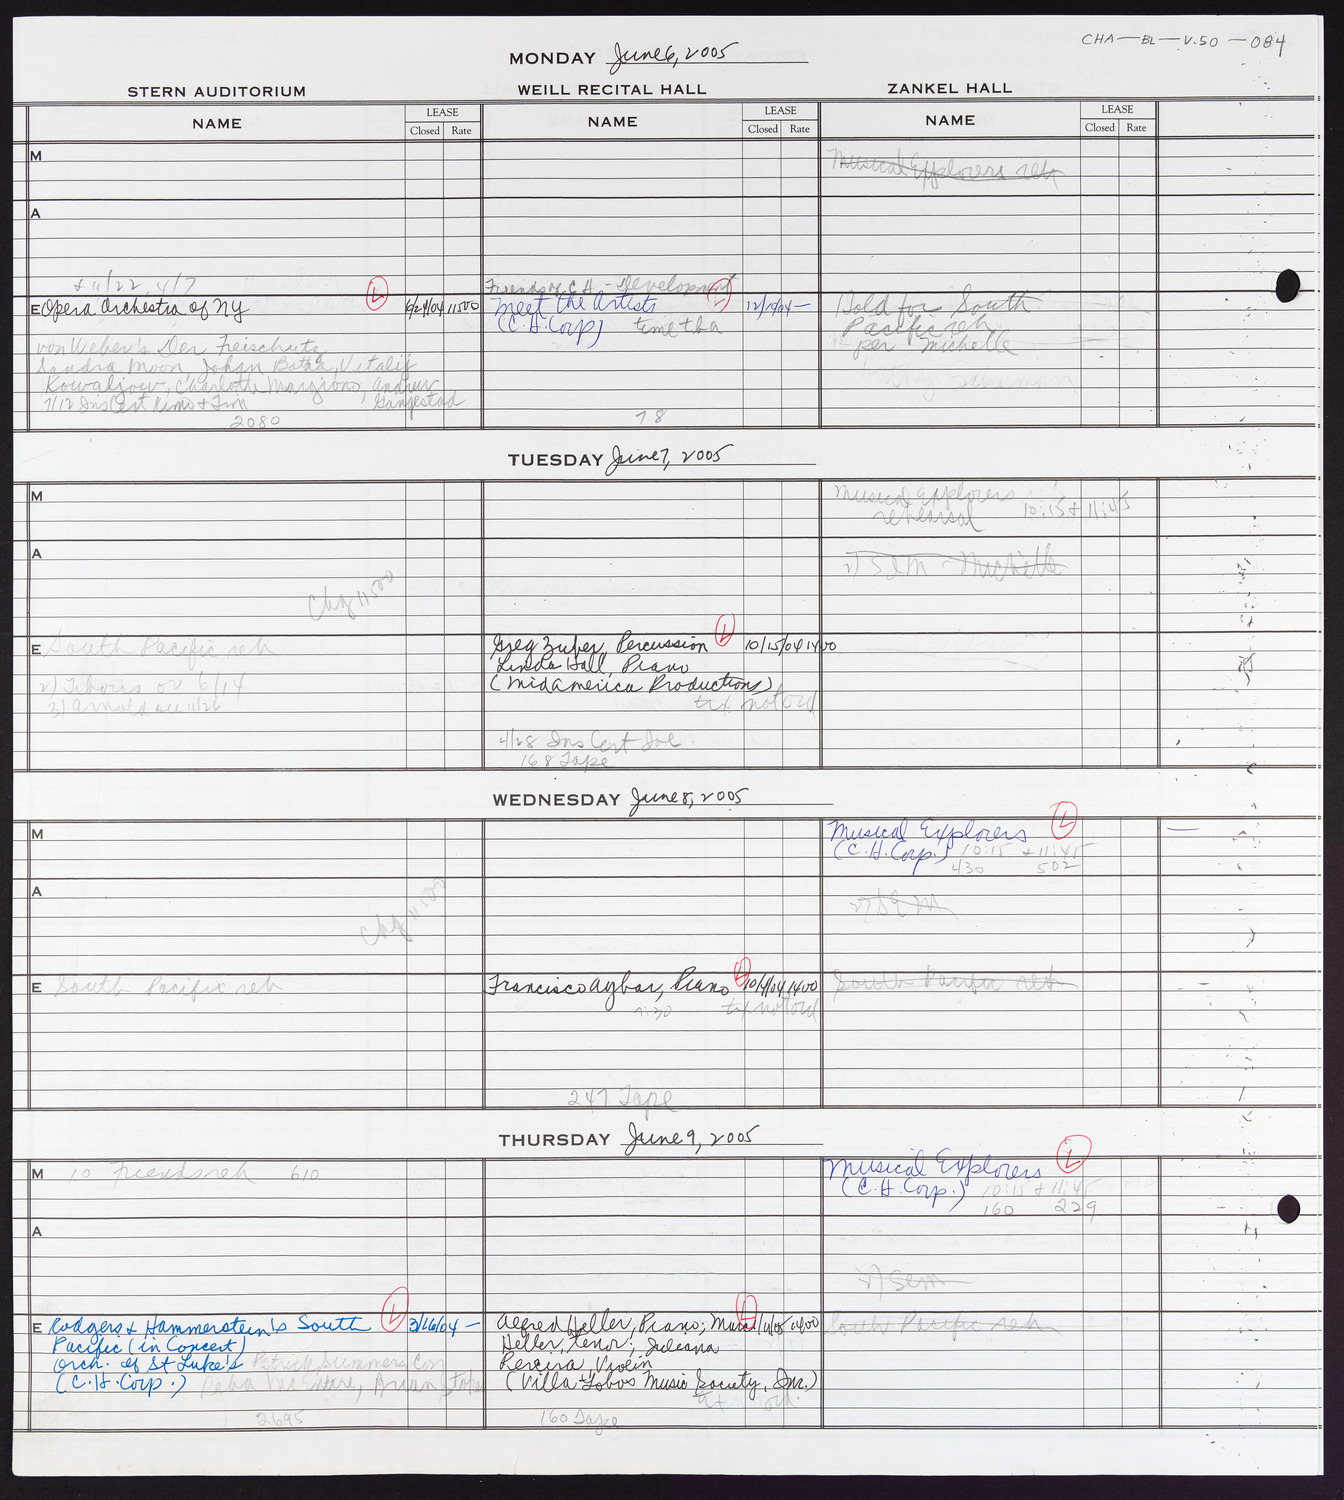 Carnegie Hall Booking Ledger, volume 50, page 84